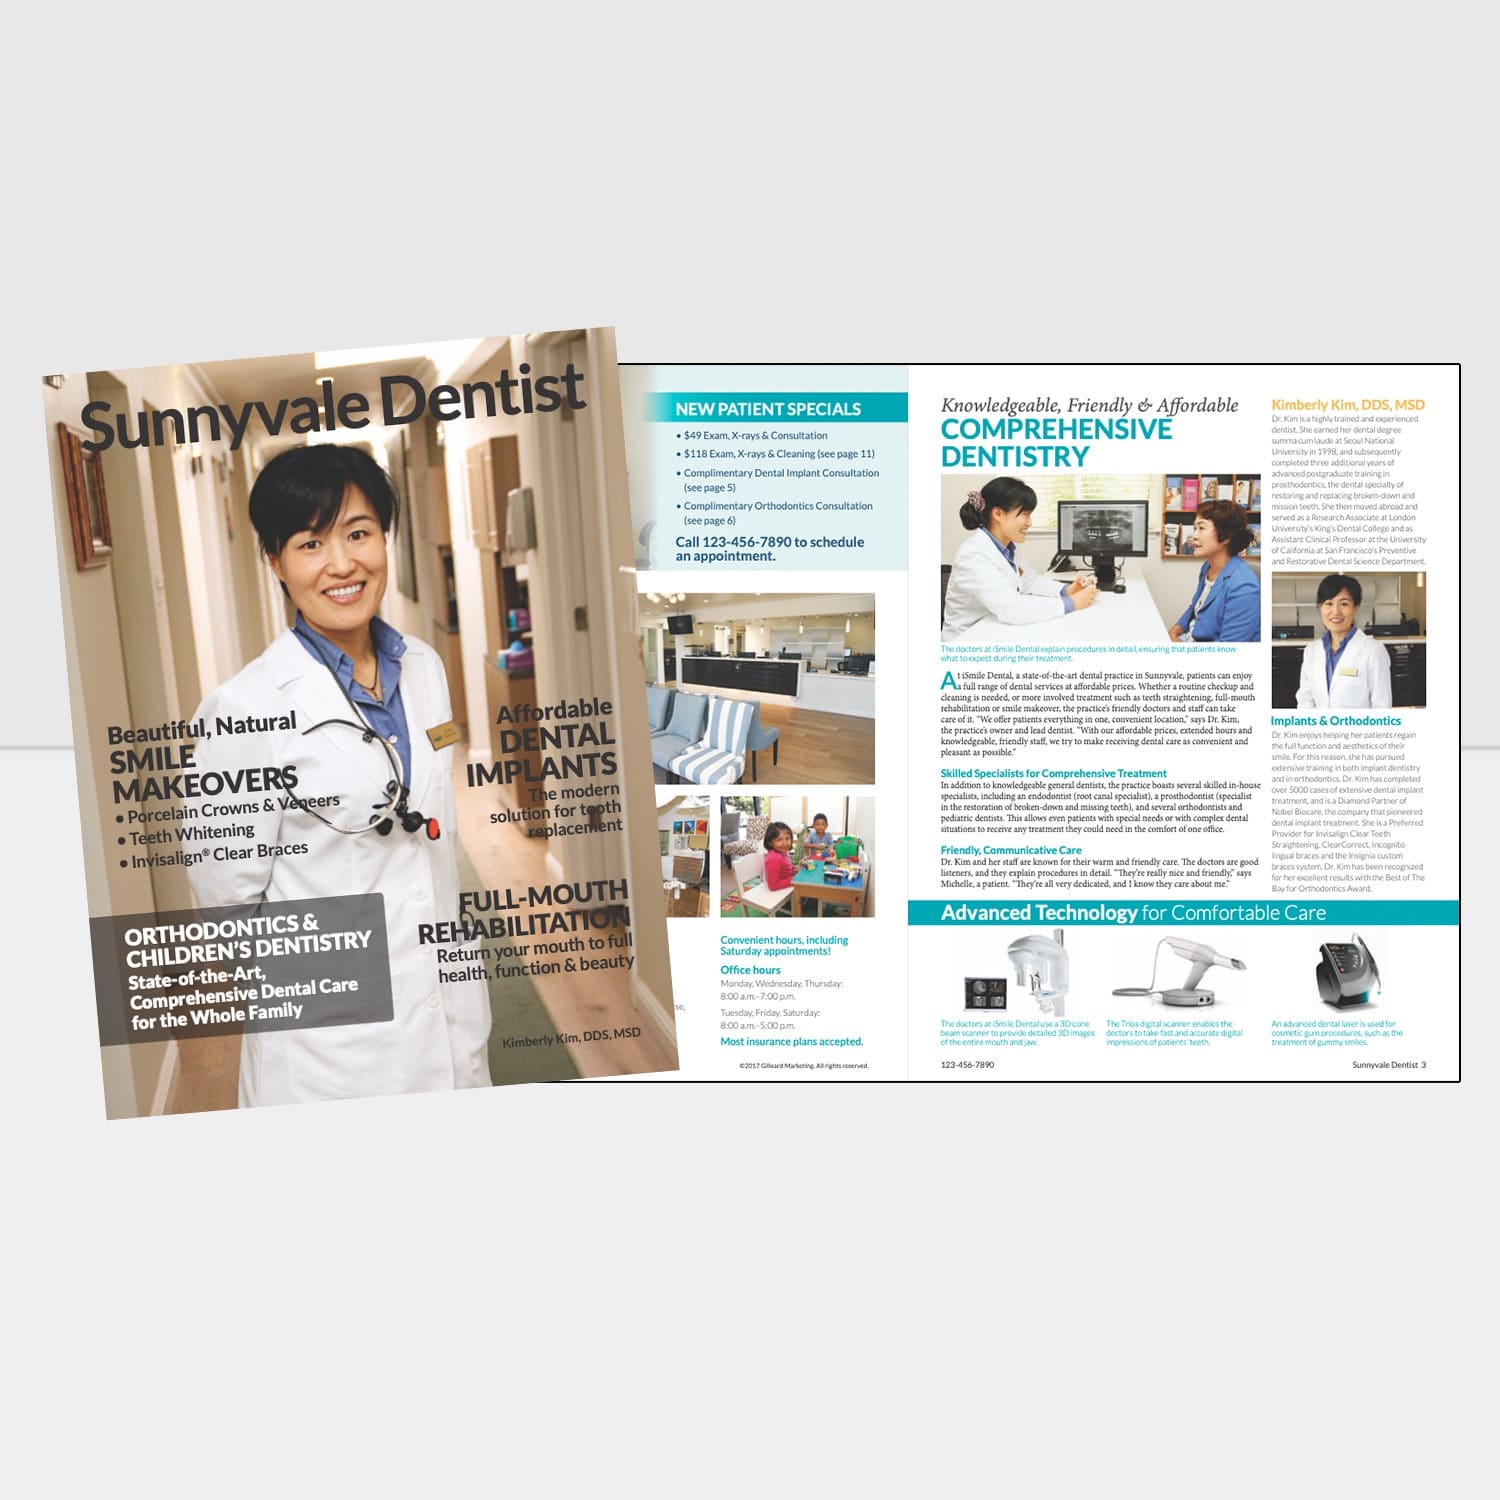 Mockup of a dental magazine created by Gilleard Marketing for effective marketing for prosthodontists.